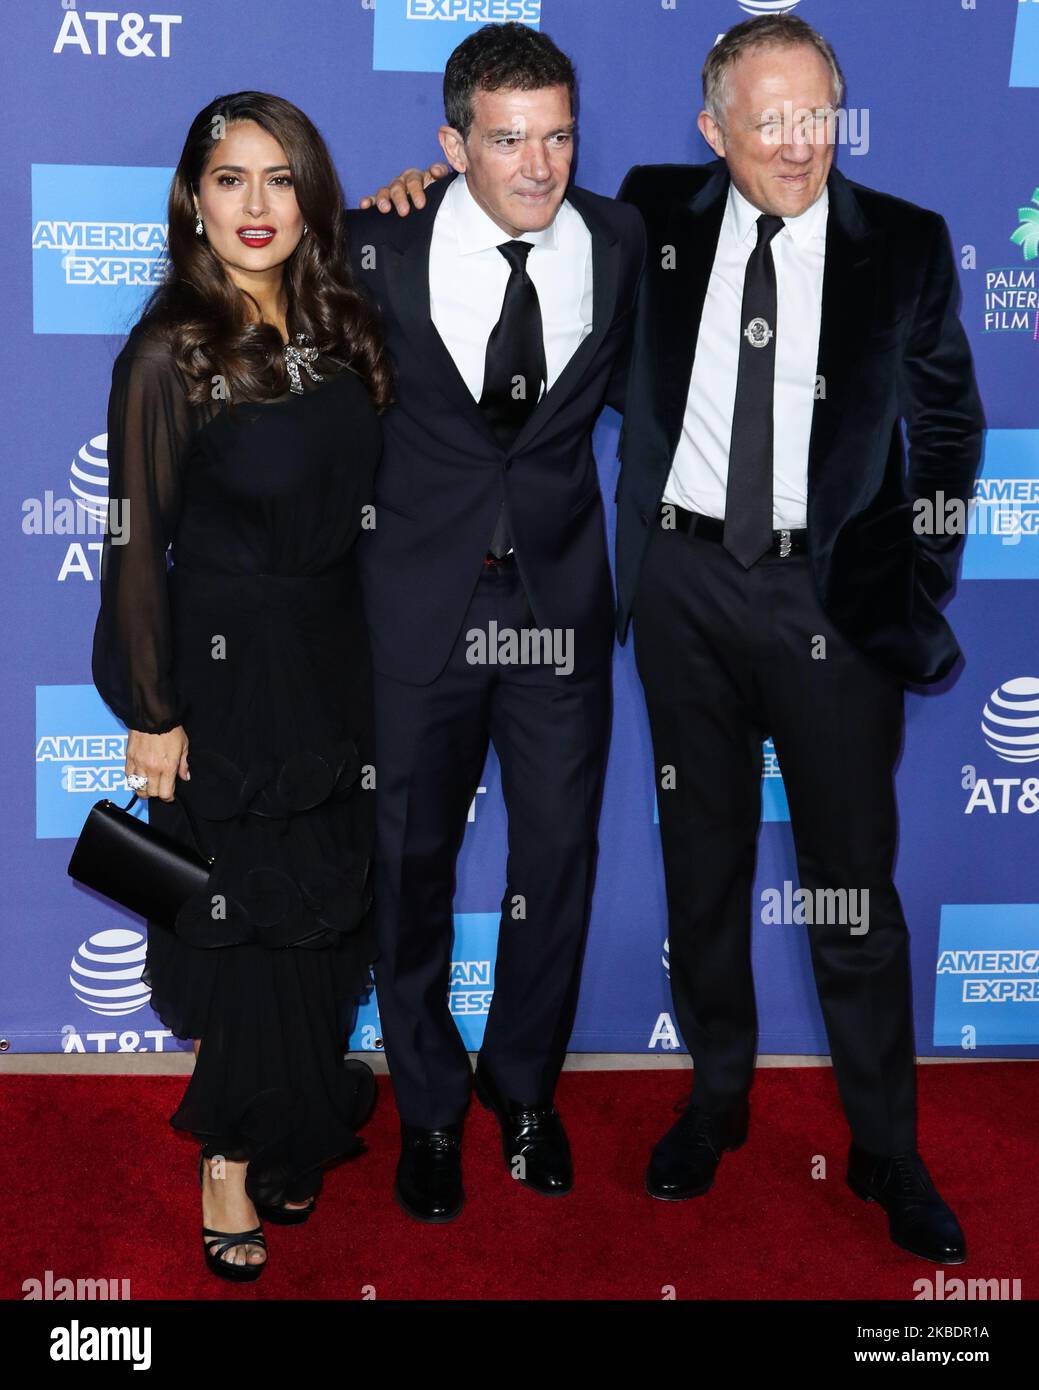 PALM SPRINGS, CALIFORNIA, USA - JANUARY 02: Salma Hayek, Antonio Banderas and Francois-Henri Pinault arrive at the 31st Annual Palm Springs International Film Festival Awards Gala held at the Palm Springs Convention Center on January 2, 2020 in Palm Springs, California, United States. (Photo by Xavier Collin/Image Press Agency/NurPhoto) Stock Photo